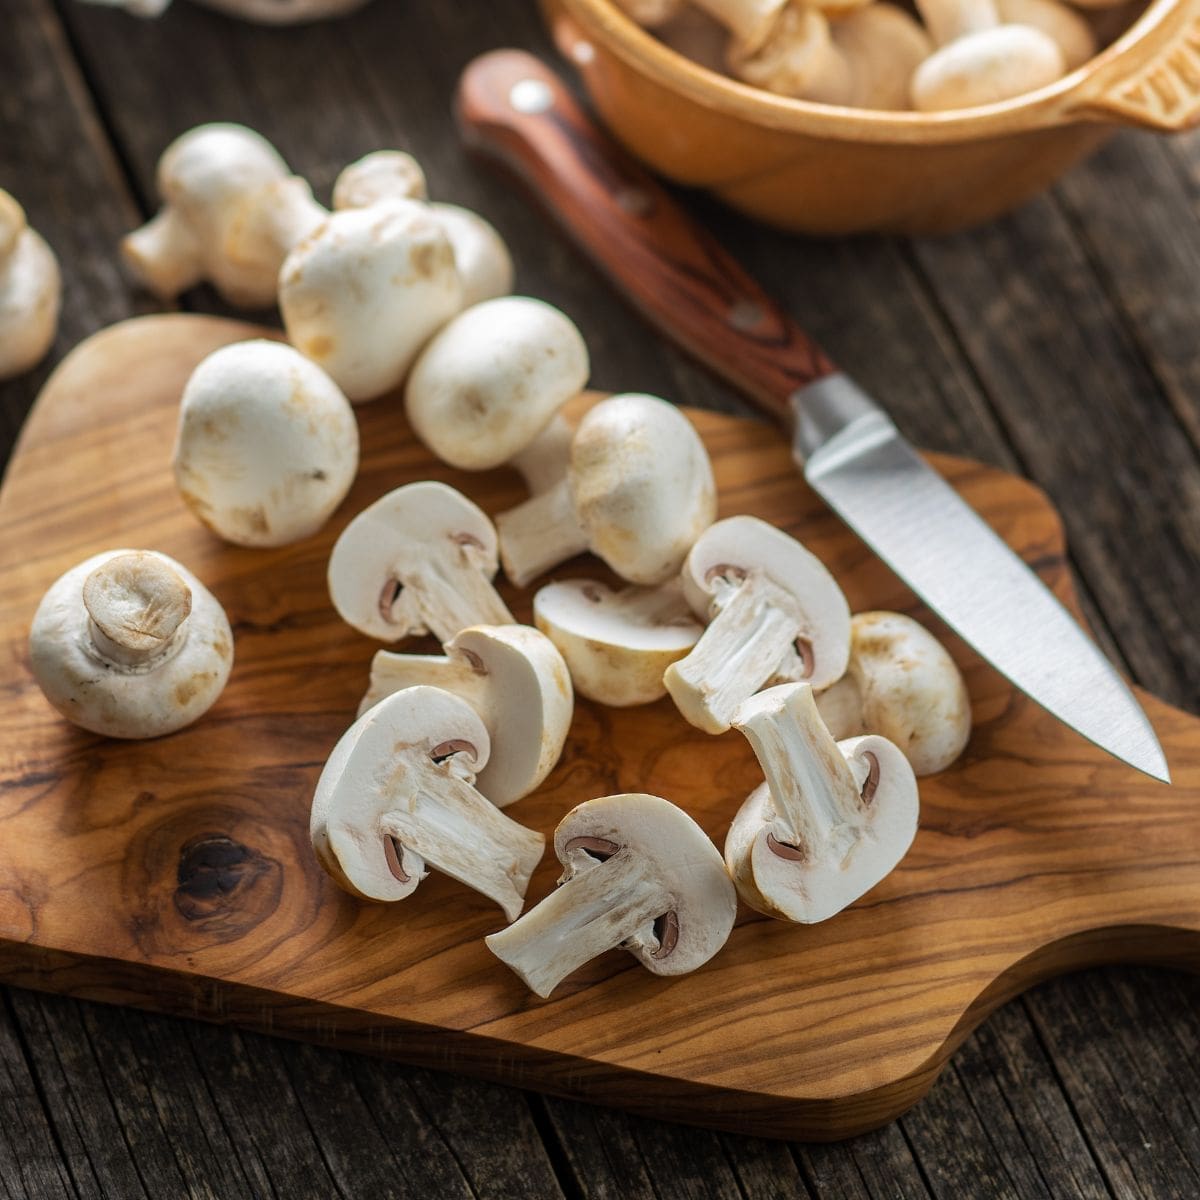 Substitute for mushrooms (7 ‘mush-try’ replacements!)